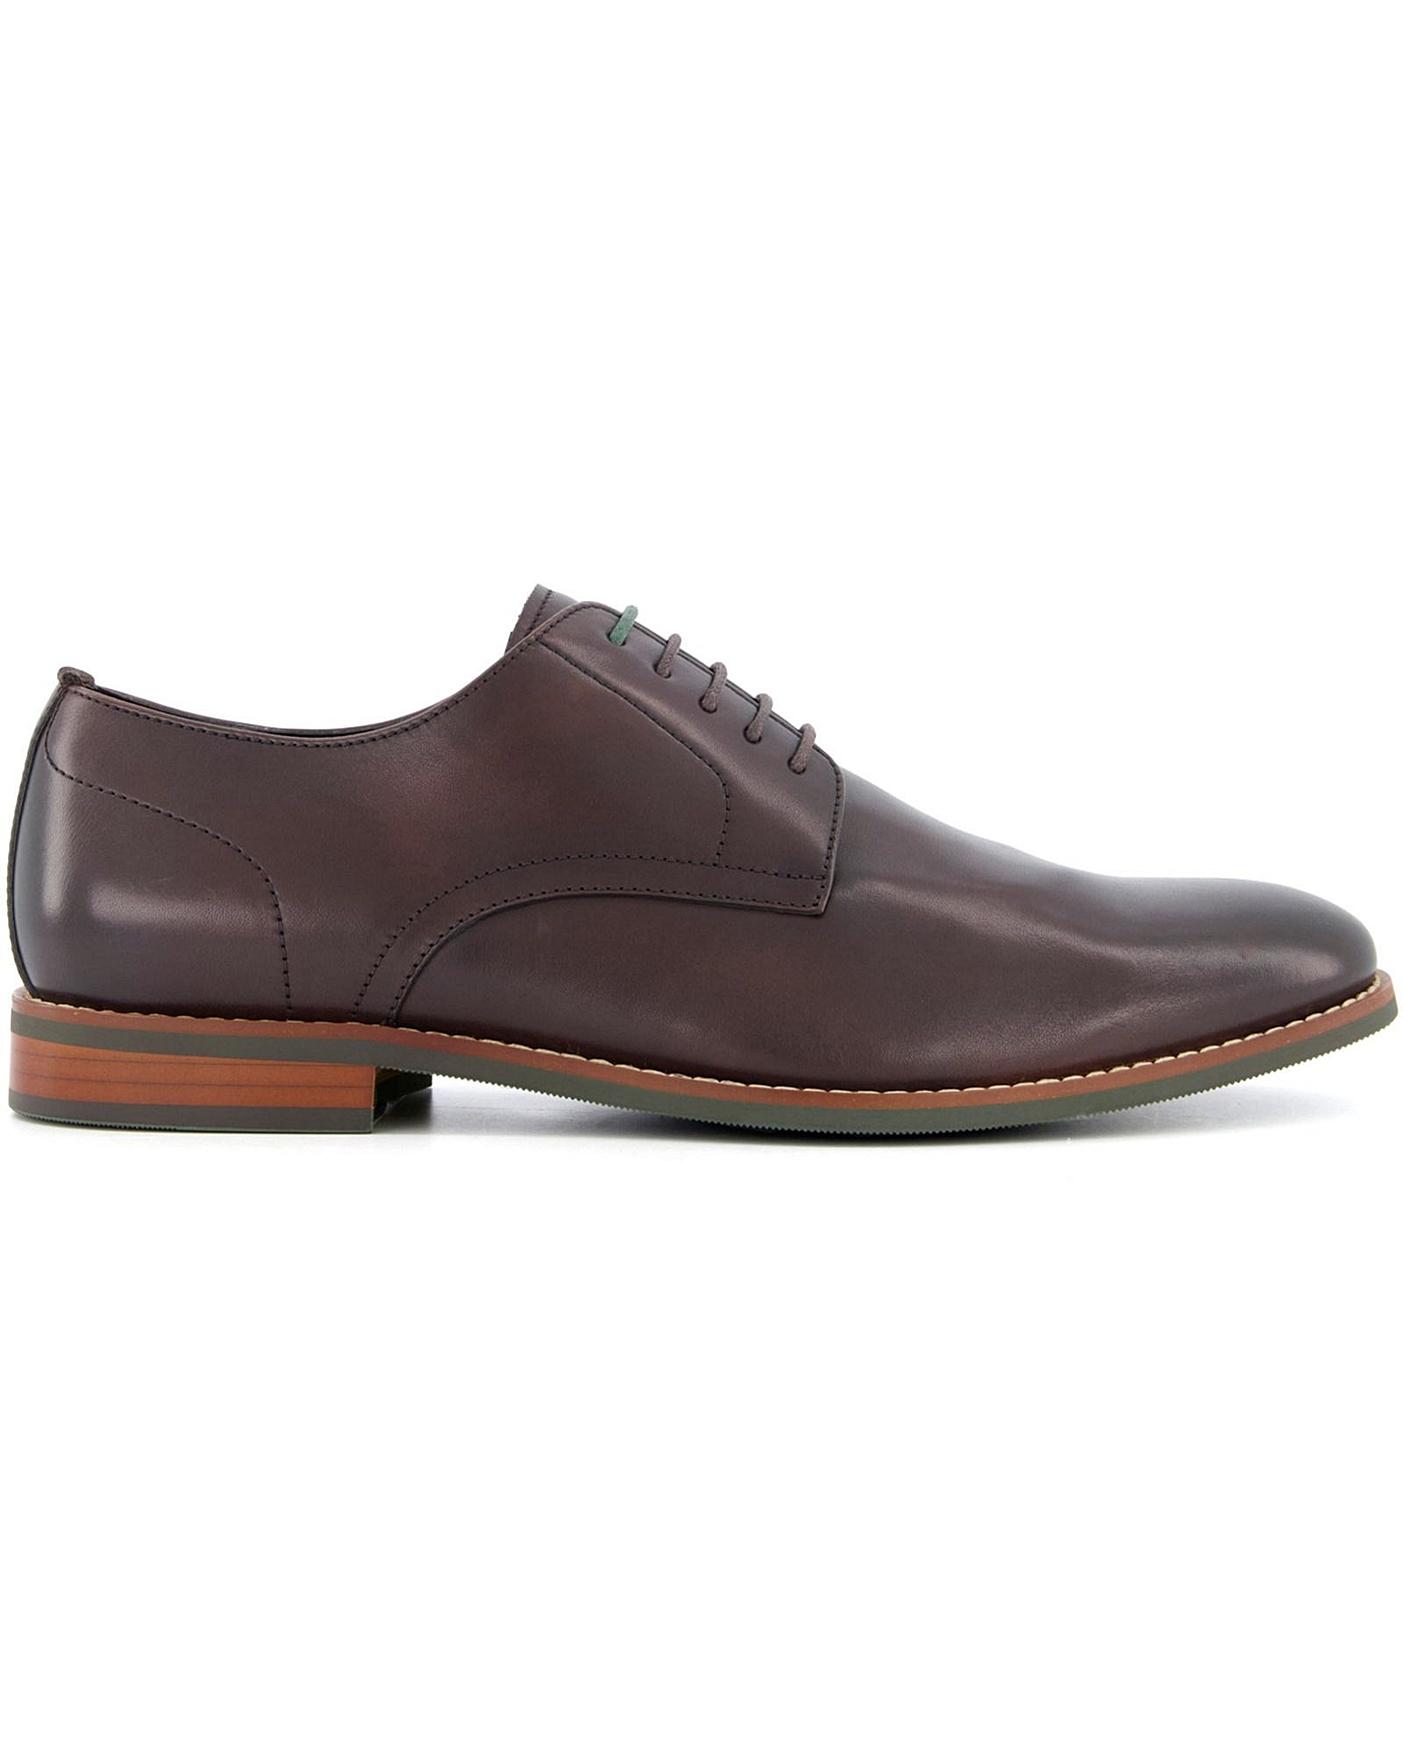 Suffolks Leather Smart Gibson Shoes